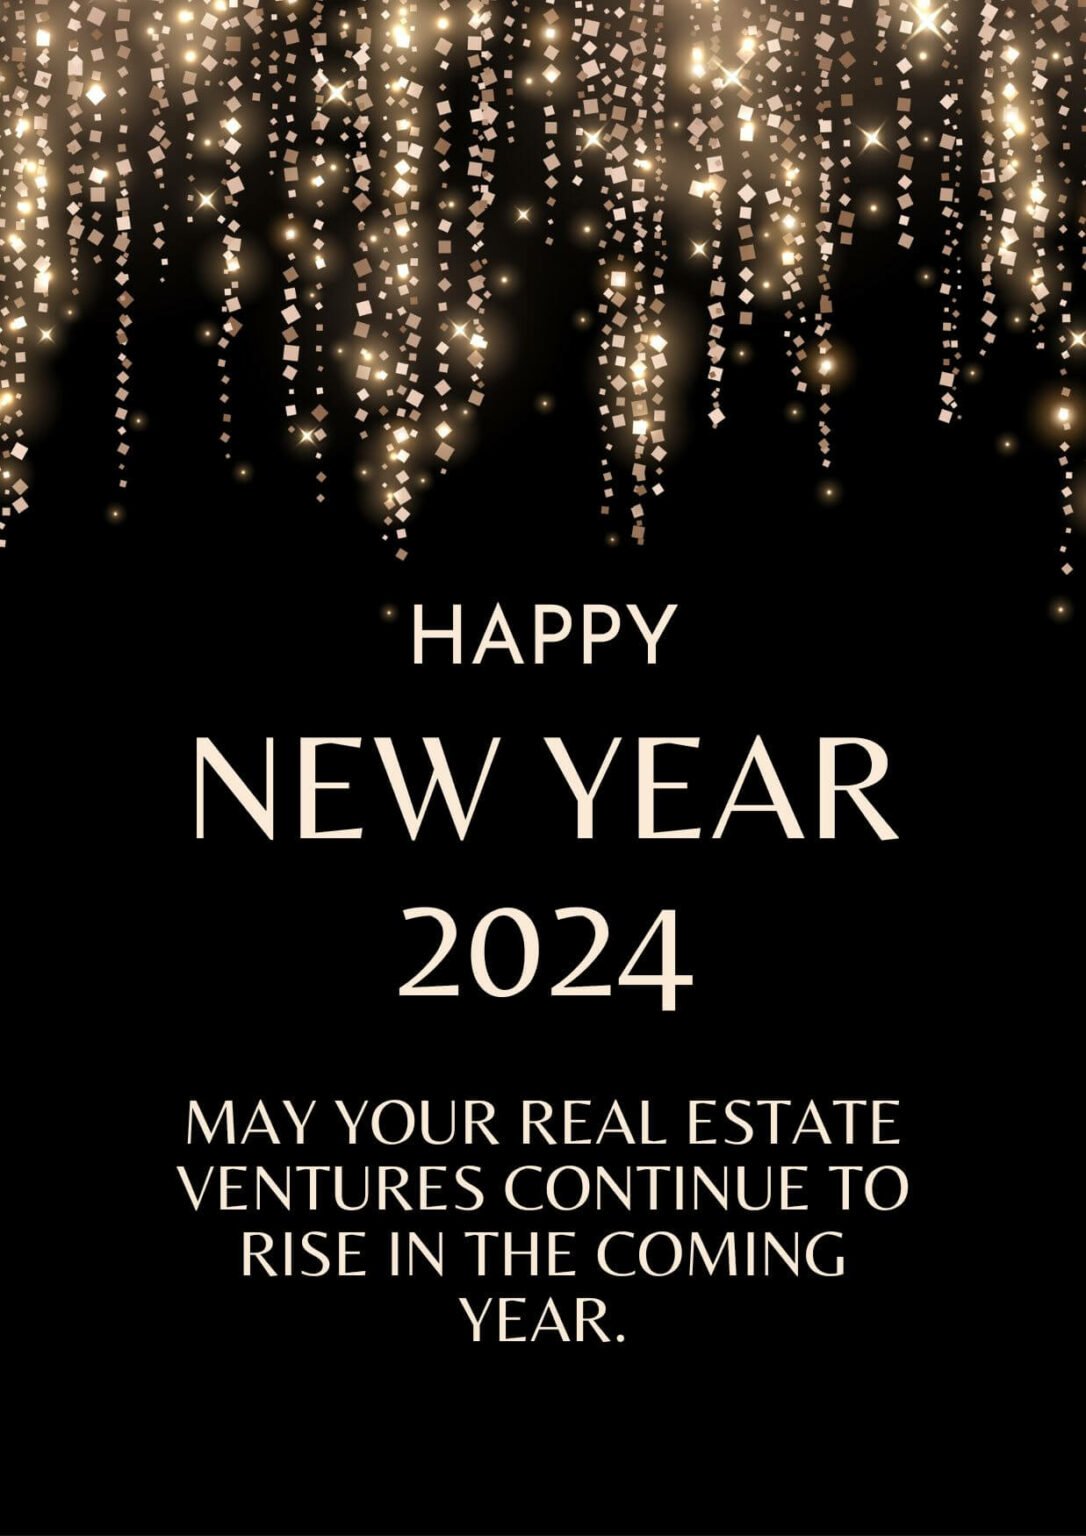 Happy New Year Quotes 2024 For Real Estate 1086x1536 